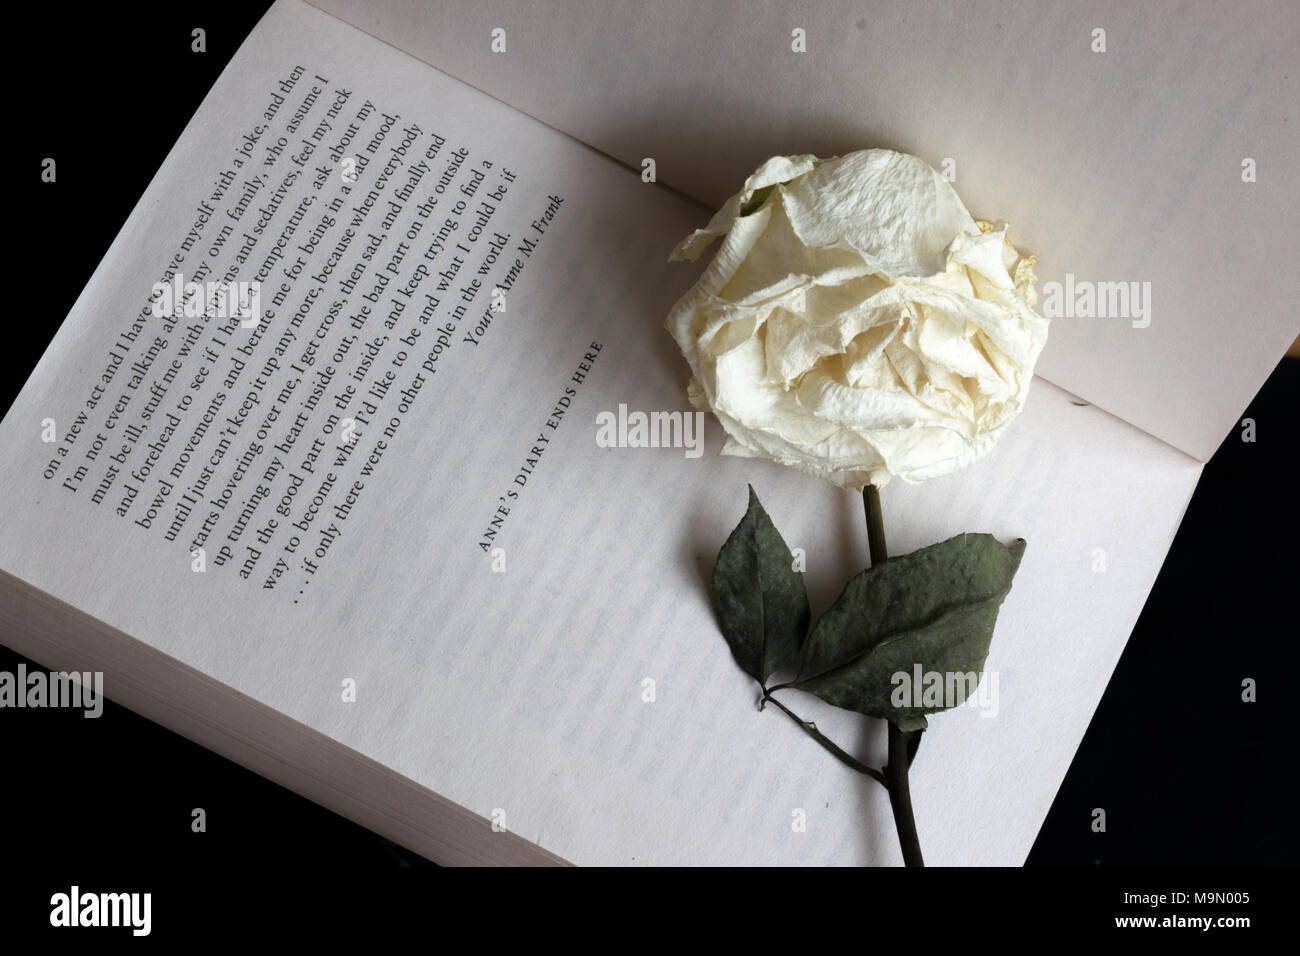 Last page of 'The Diary of a Young Girl' by Anne Frank, showing the words 'Anne's diary ends here' with a withered white rose placed on the book Stock Photo